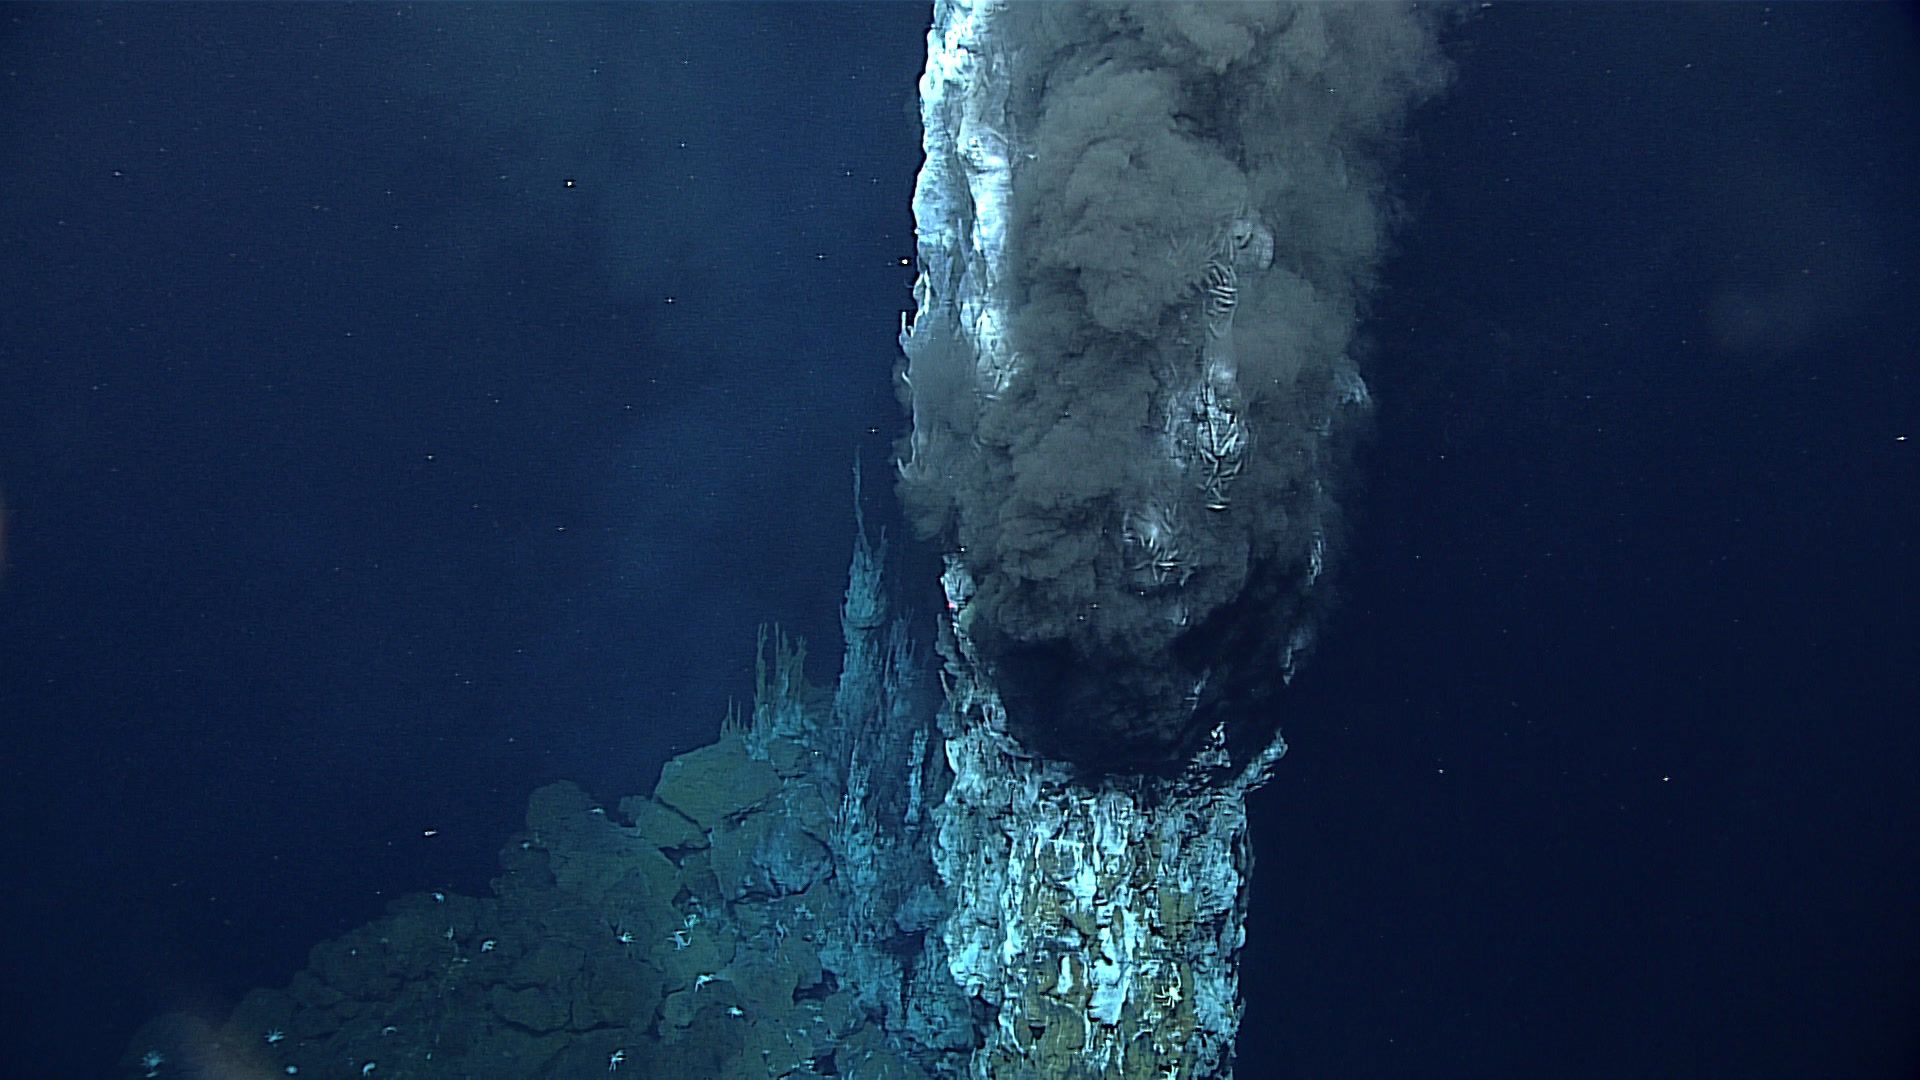 how deep is the indian ocean at its deepest point